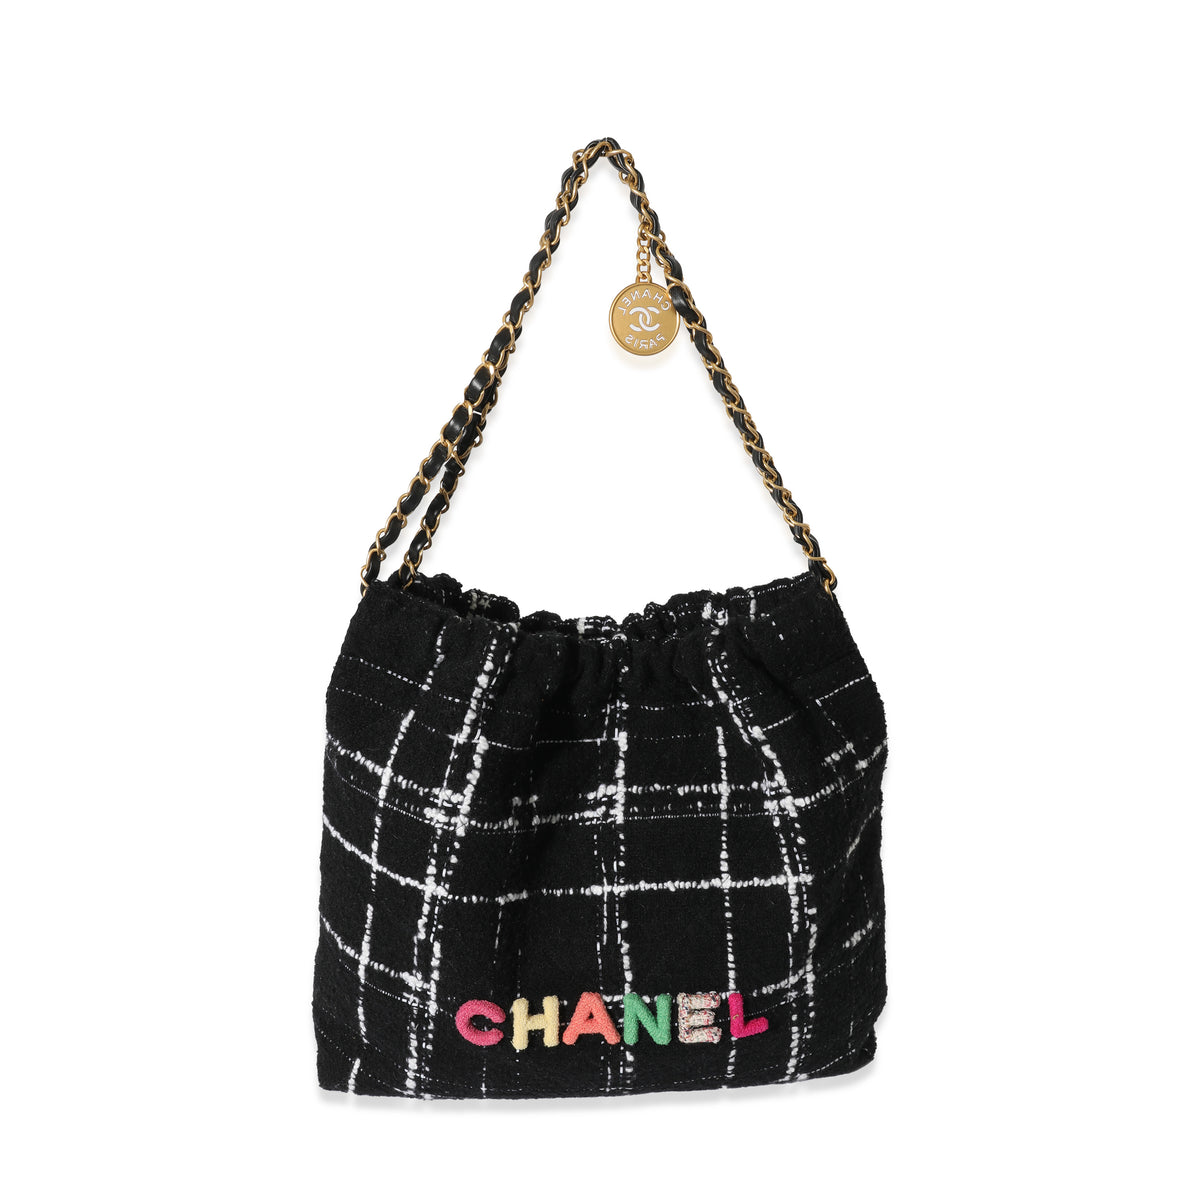 Sell Chanel Small Tweed Gabrielle Bag - Black/Multicolor